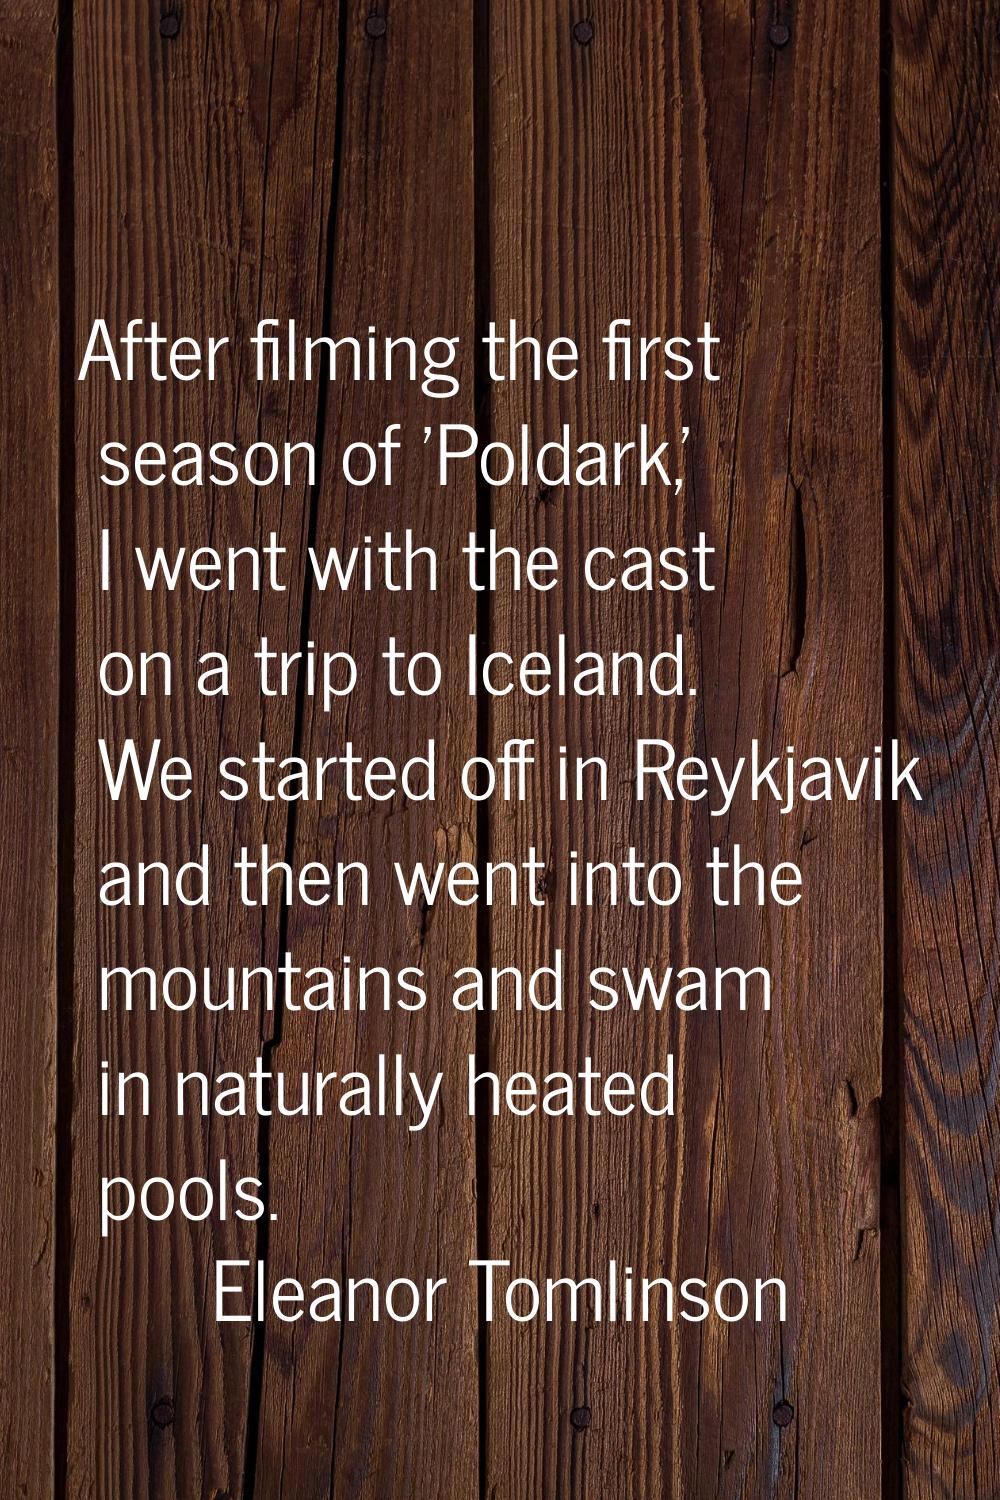 After filming the first season of 'Poldark,' I went with the cast on a trip to Iceland. We started 